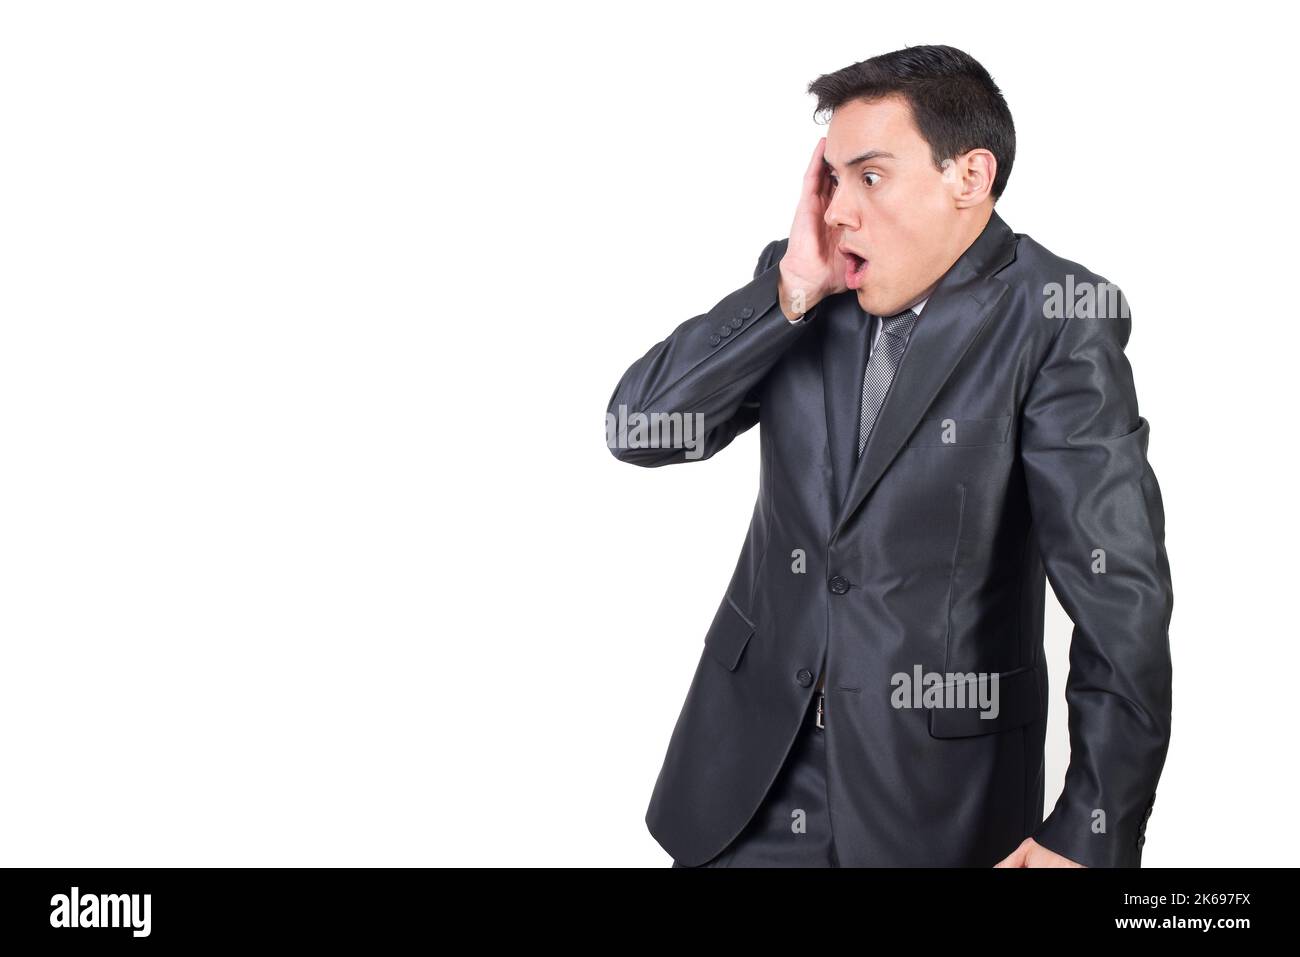 Astonished man in suit touching cheek in studio Stock Photo